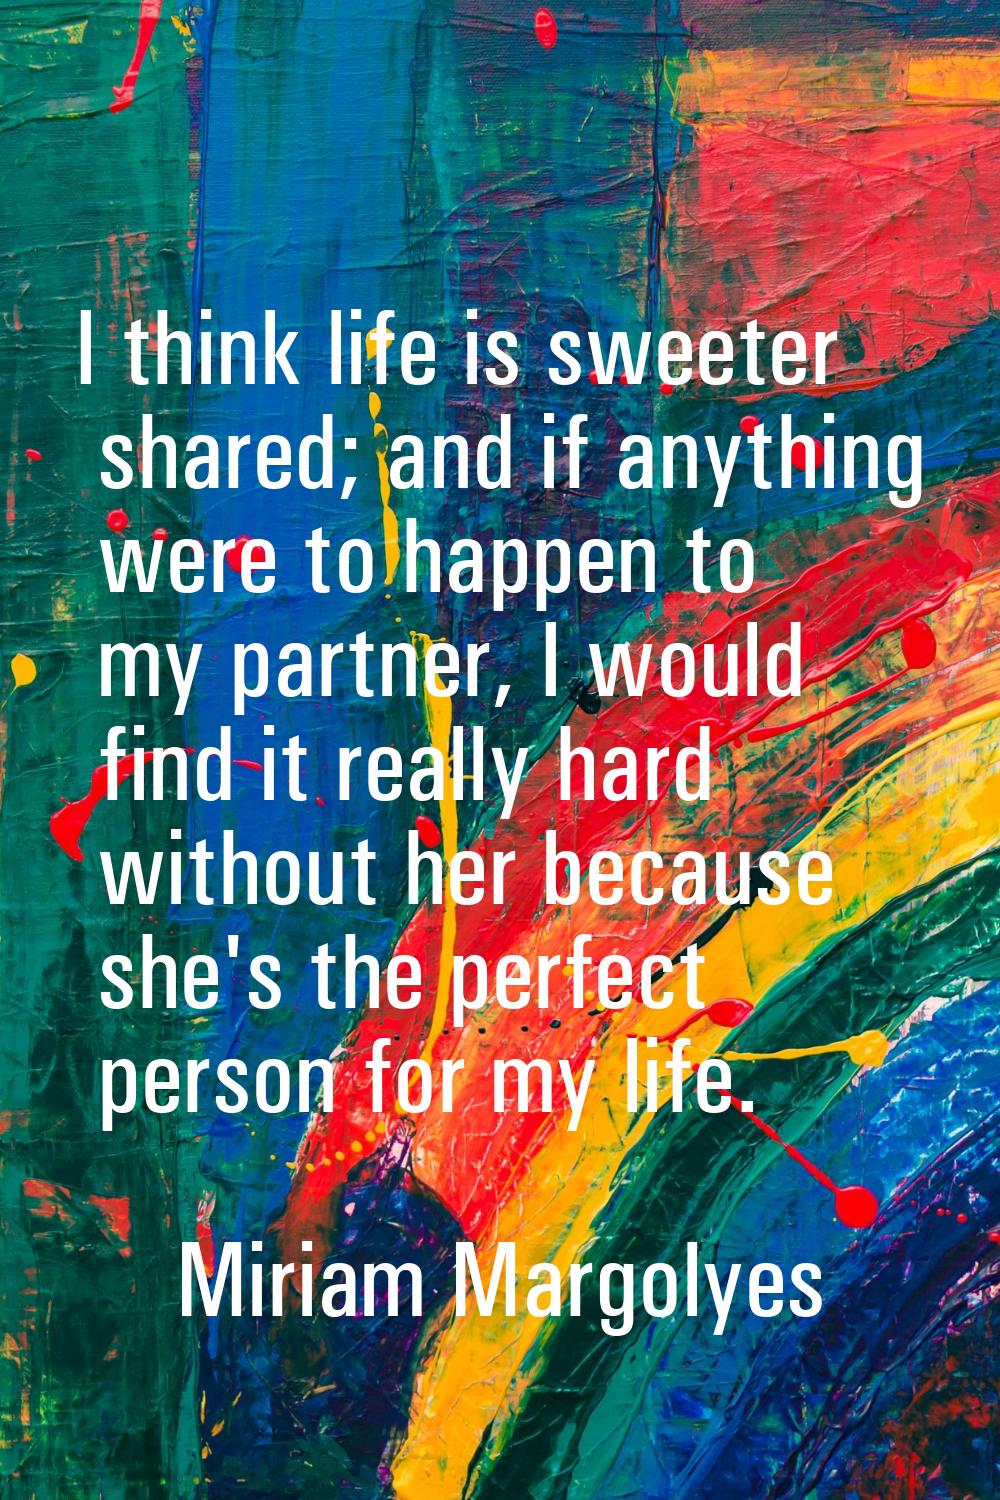 I think life is sweeter shared; and if anything were to happen to my partner, I would find it reall